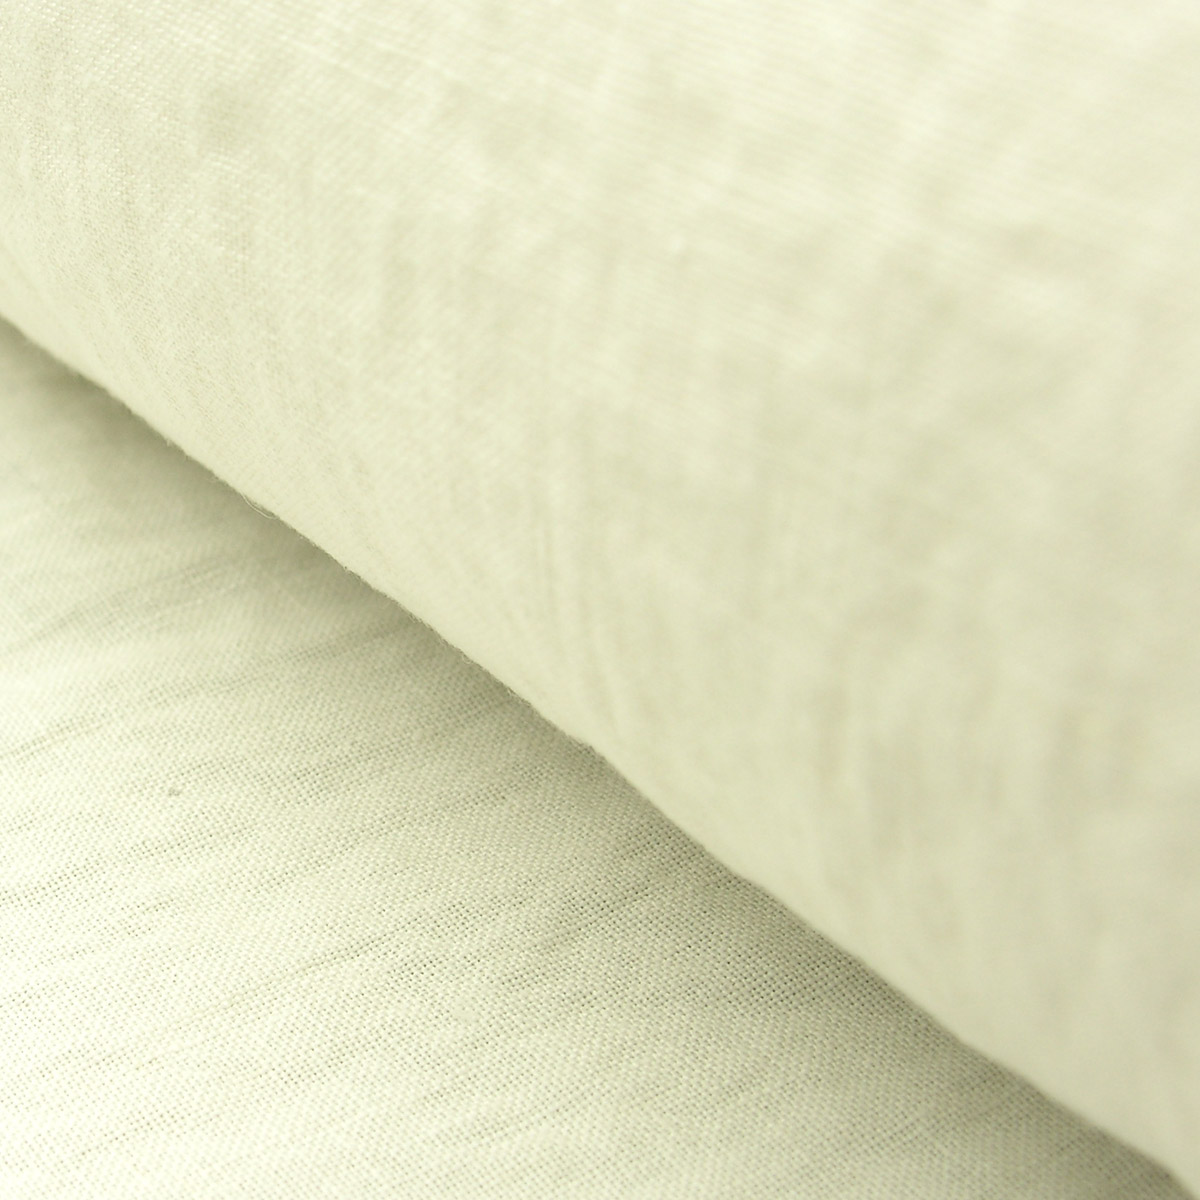 Extra Wide 100% Linen Fabric Soft Linen Material for Home Decor, Curtains,  Clothes 118/ 300cm Wide Plain NATURAL 